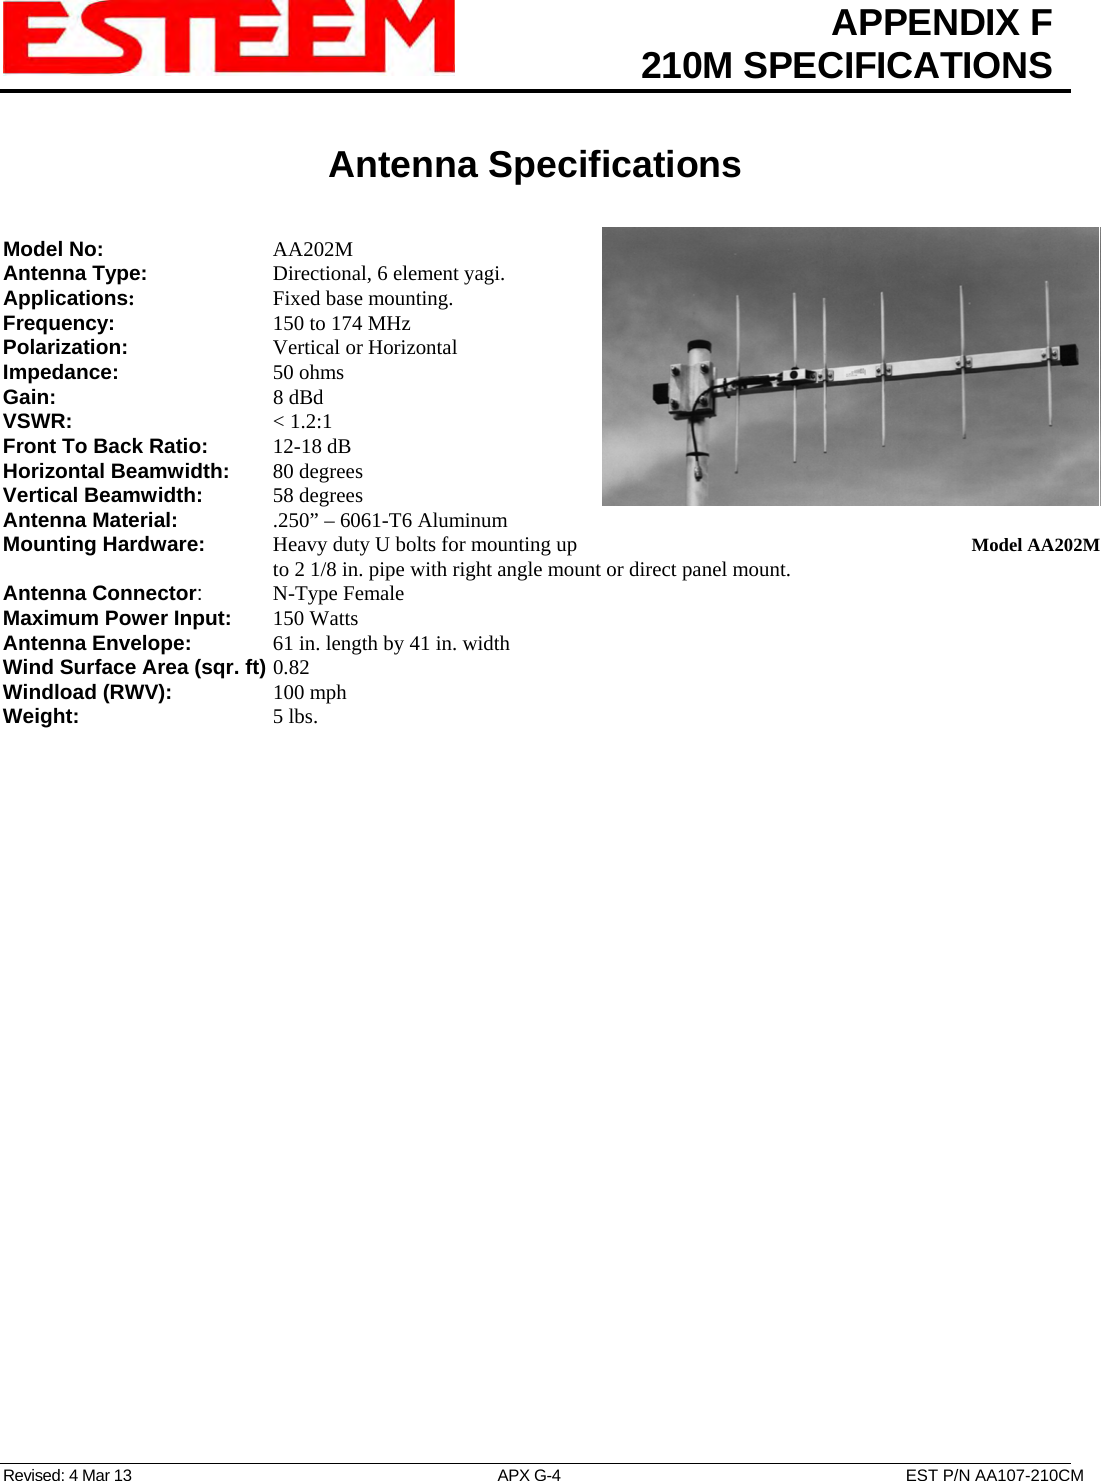  APPENDIX F  210M SPECIFICATIONS   Antenna Specifications   Revised: 4 Mar 13  APX G-4  EST P/N AA107-210CM Model No:    AA202M Antenna Type:     Directional, 6 element yagi.  Applications:    Fixed base mounting. Frequency:    150 to 174 MHz  Polarization:    Vertical or Horizontal Impedance:    50 ohms Gain:     8 dBd VSWR:      &lt; 1.2:1  Front To Back Ratio:   12-18 dB Horizontal Beamwidth:  80 degrees Vertical Beamwidth:     58 degrees Antenna Material:     .250” – 6061-T6 Aluminum  Mounting Hardware:      Heavy duty U bolts for mounting up to 2 1/8 in. pipe with right angle mount or direct panel mount.   Model AA202MAntenna Connector:   N-Type Female Maximum Power Input: 150 Watts Antenna Envelope:   61 in. length by 41 in. width Wind Surface Area (sqr. ft) 0.82 Windload (RWV):   100 mph Weight:     5 lbs.        